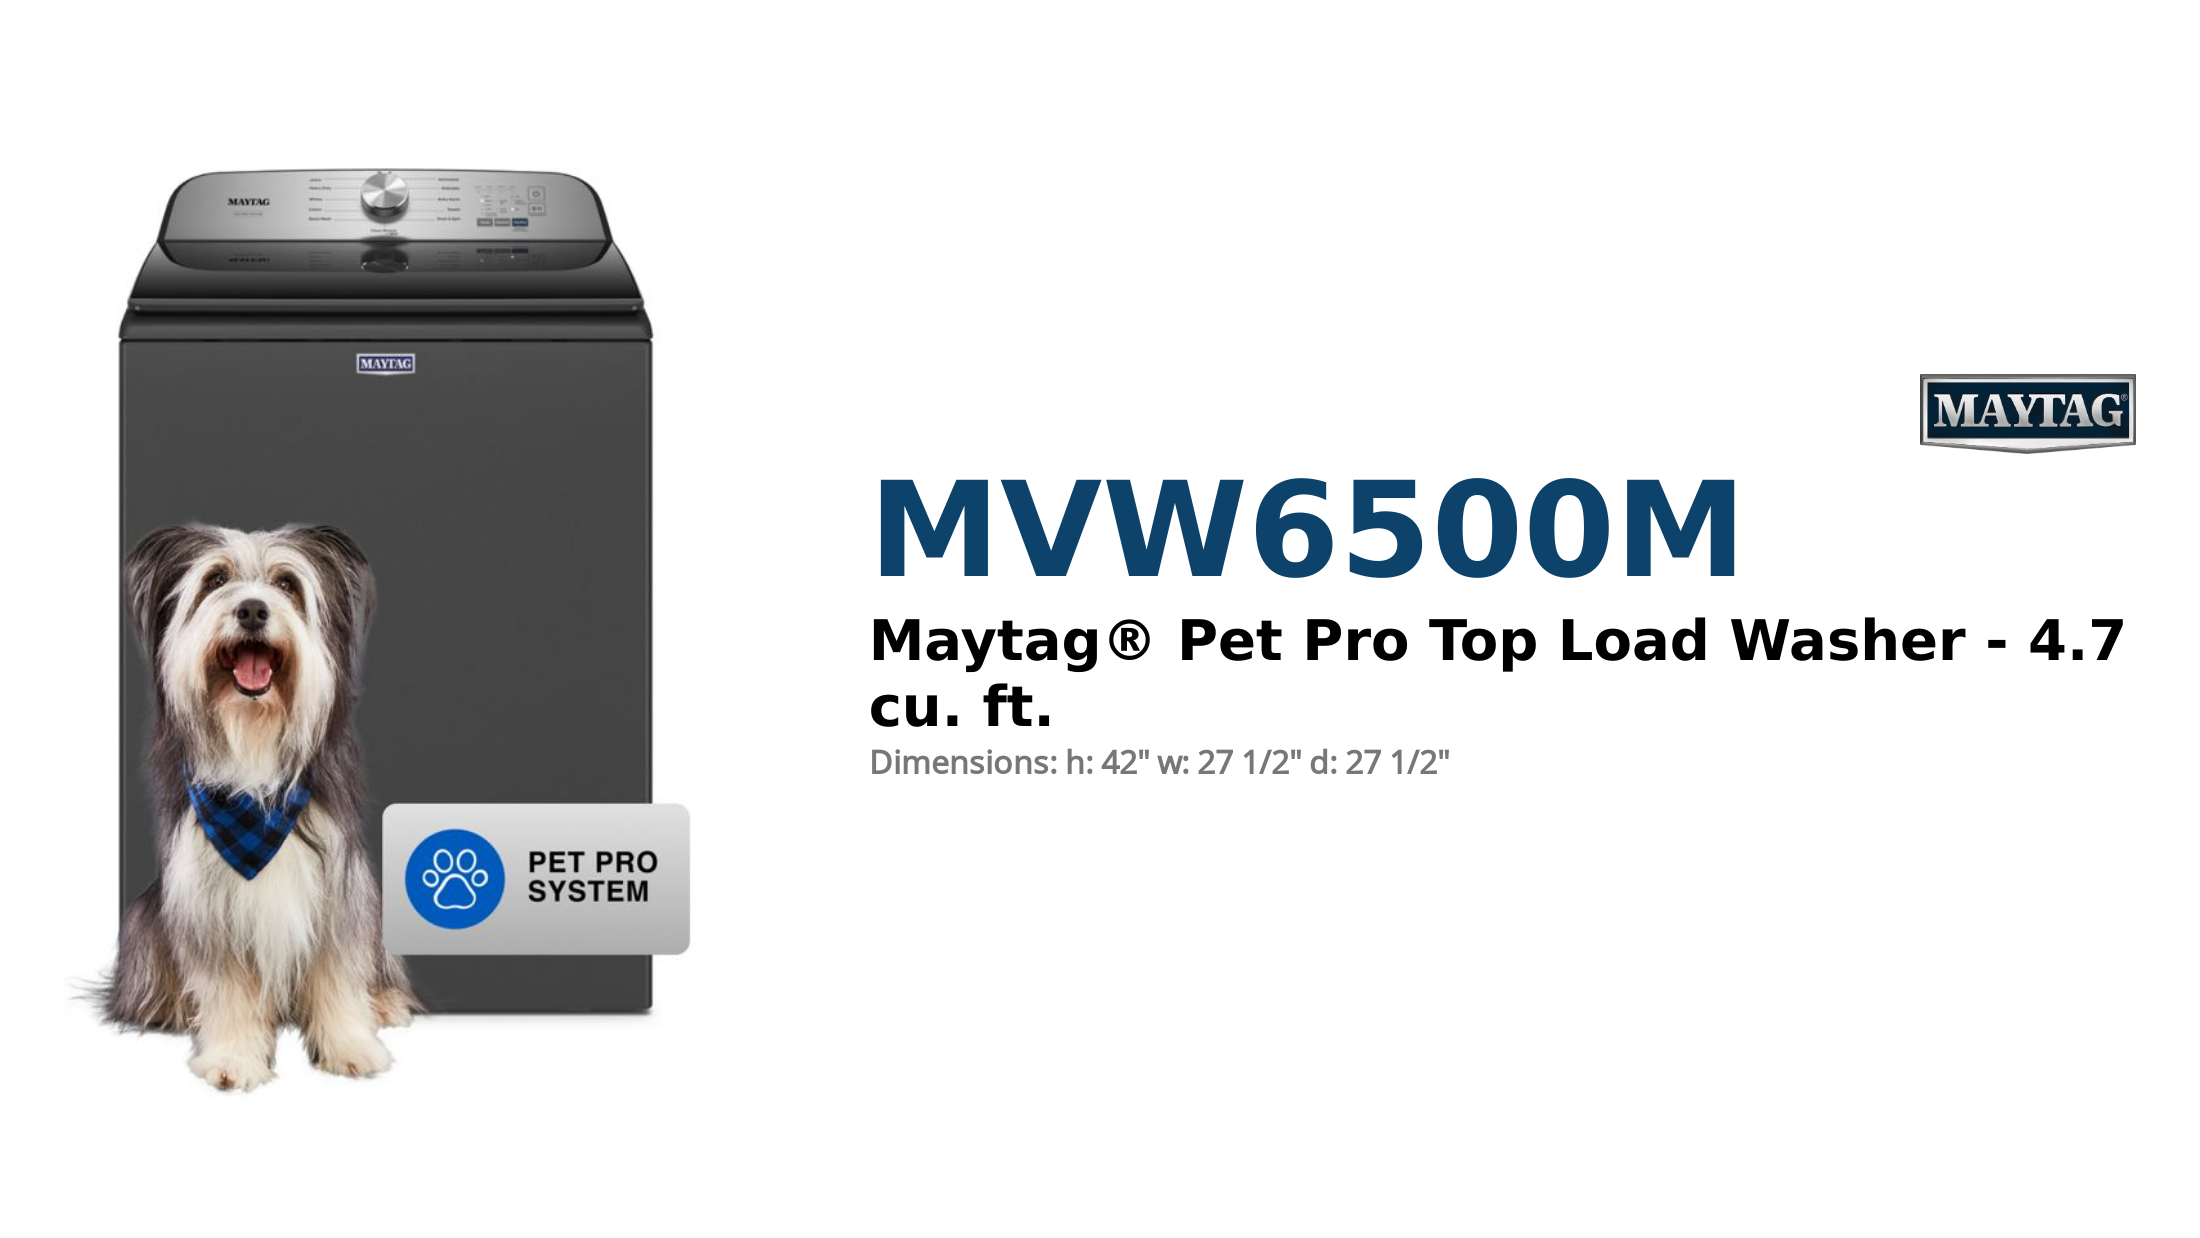 Maytag® Pet Pro Top Load Washer - 4.7 cu. ft.
 